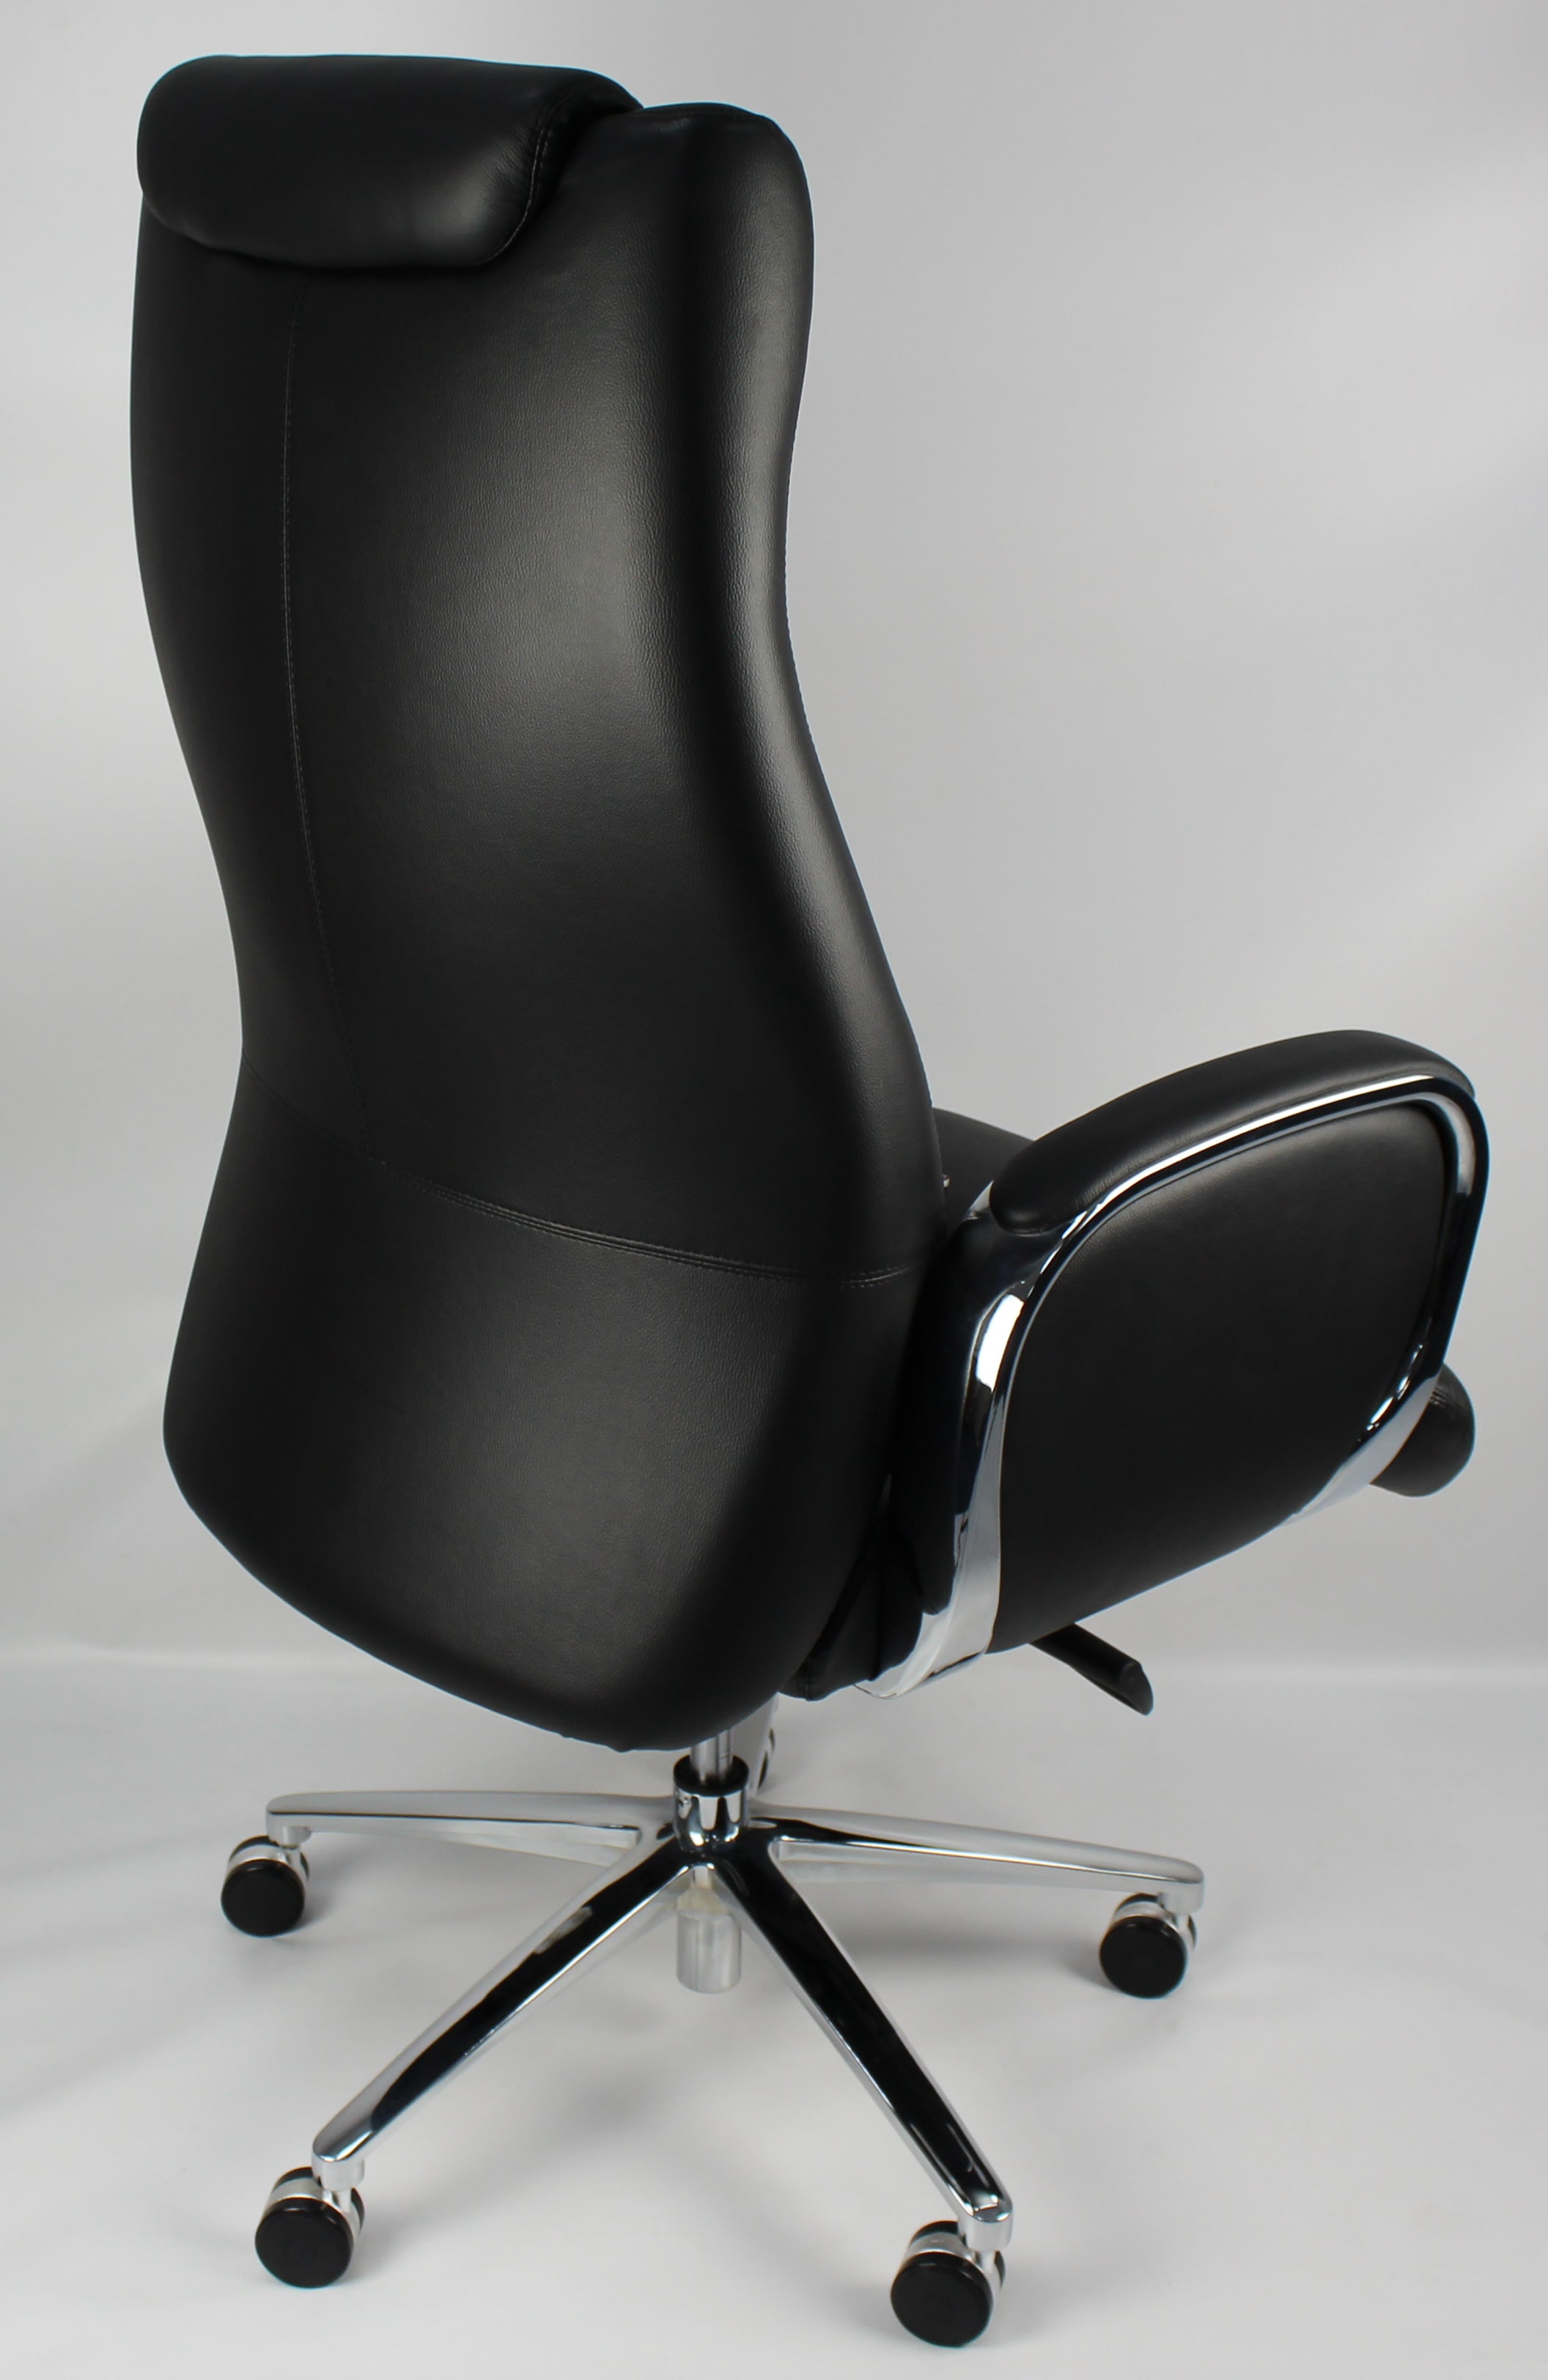 Black Leather Executive Office Chair with Chrome Trimmed Arms - J1201